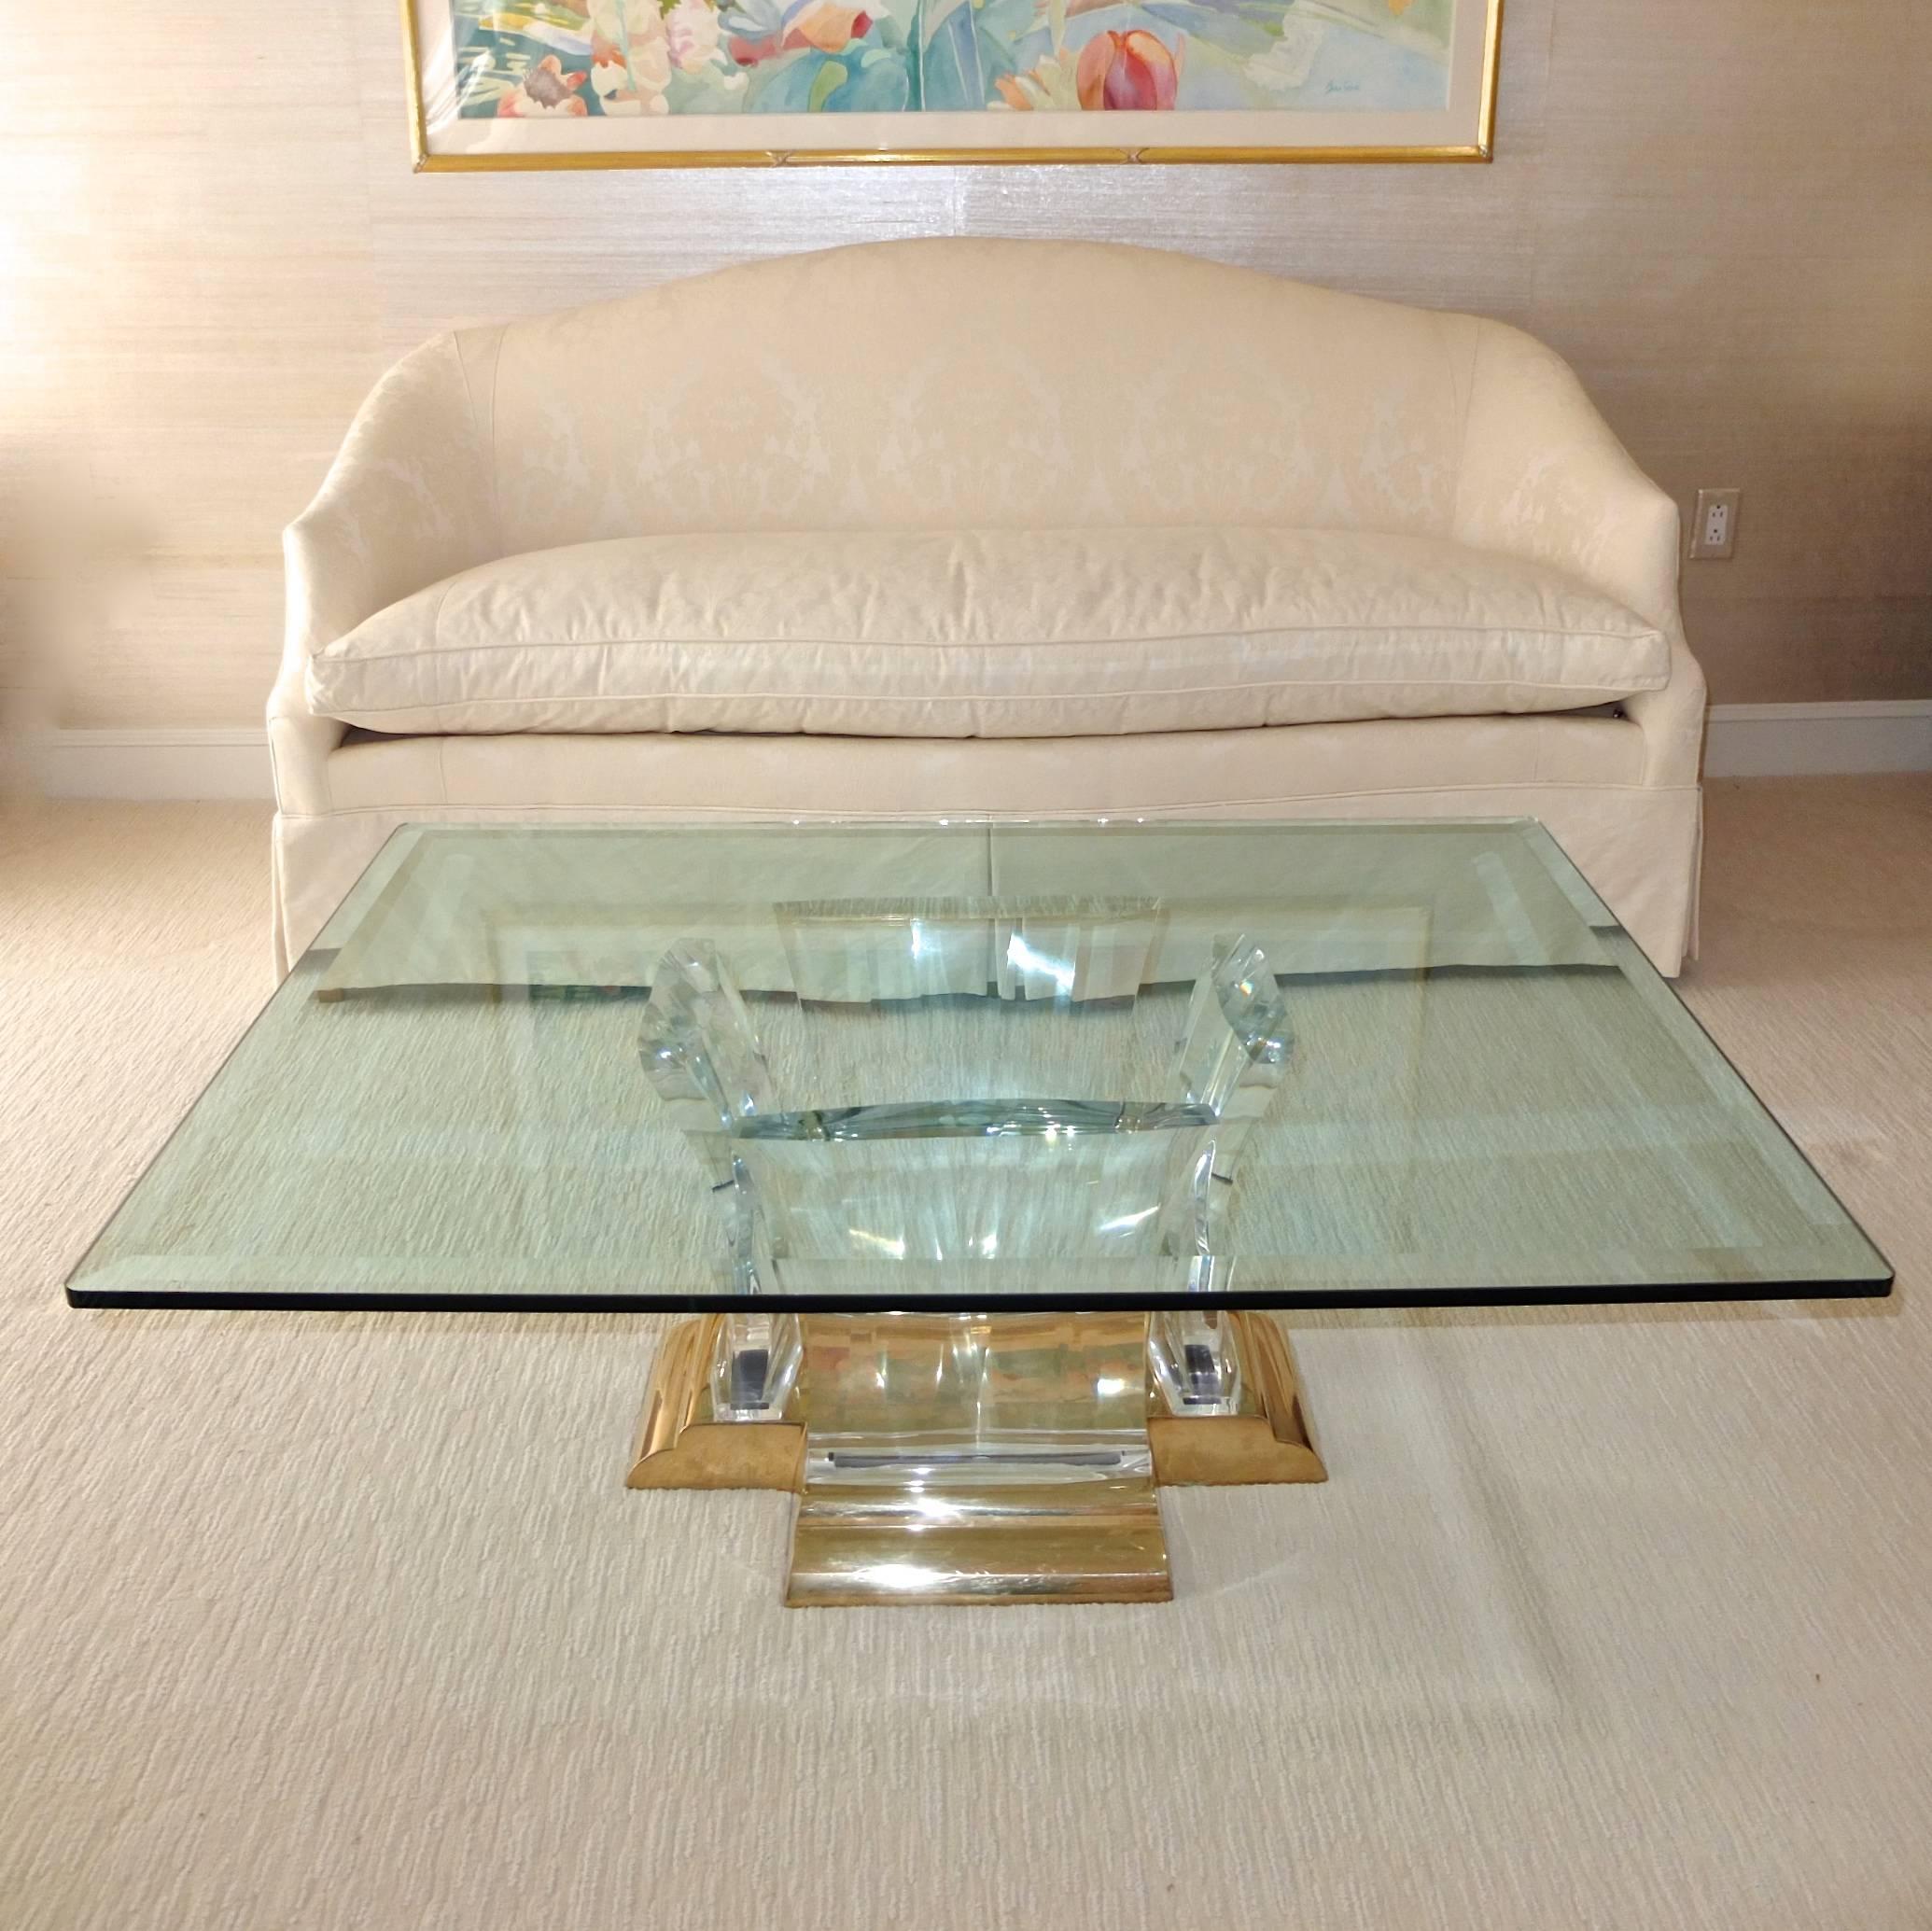 Washington cocktail table by Spectrum Limited. Very thick bevelled glass top 36 inches by 48 inches. Rectangular form polished cast brass base with four curved and prismatic 2 inch thick Lucite supports which support the glass top.
Dimensions of